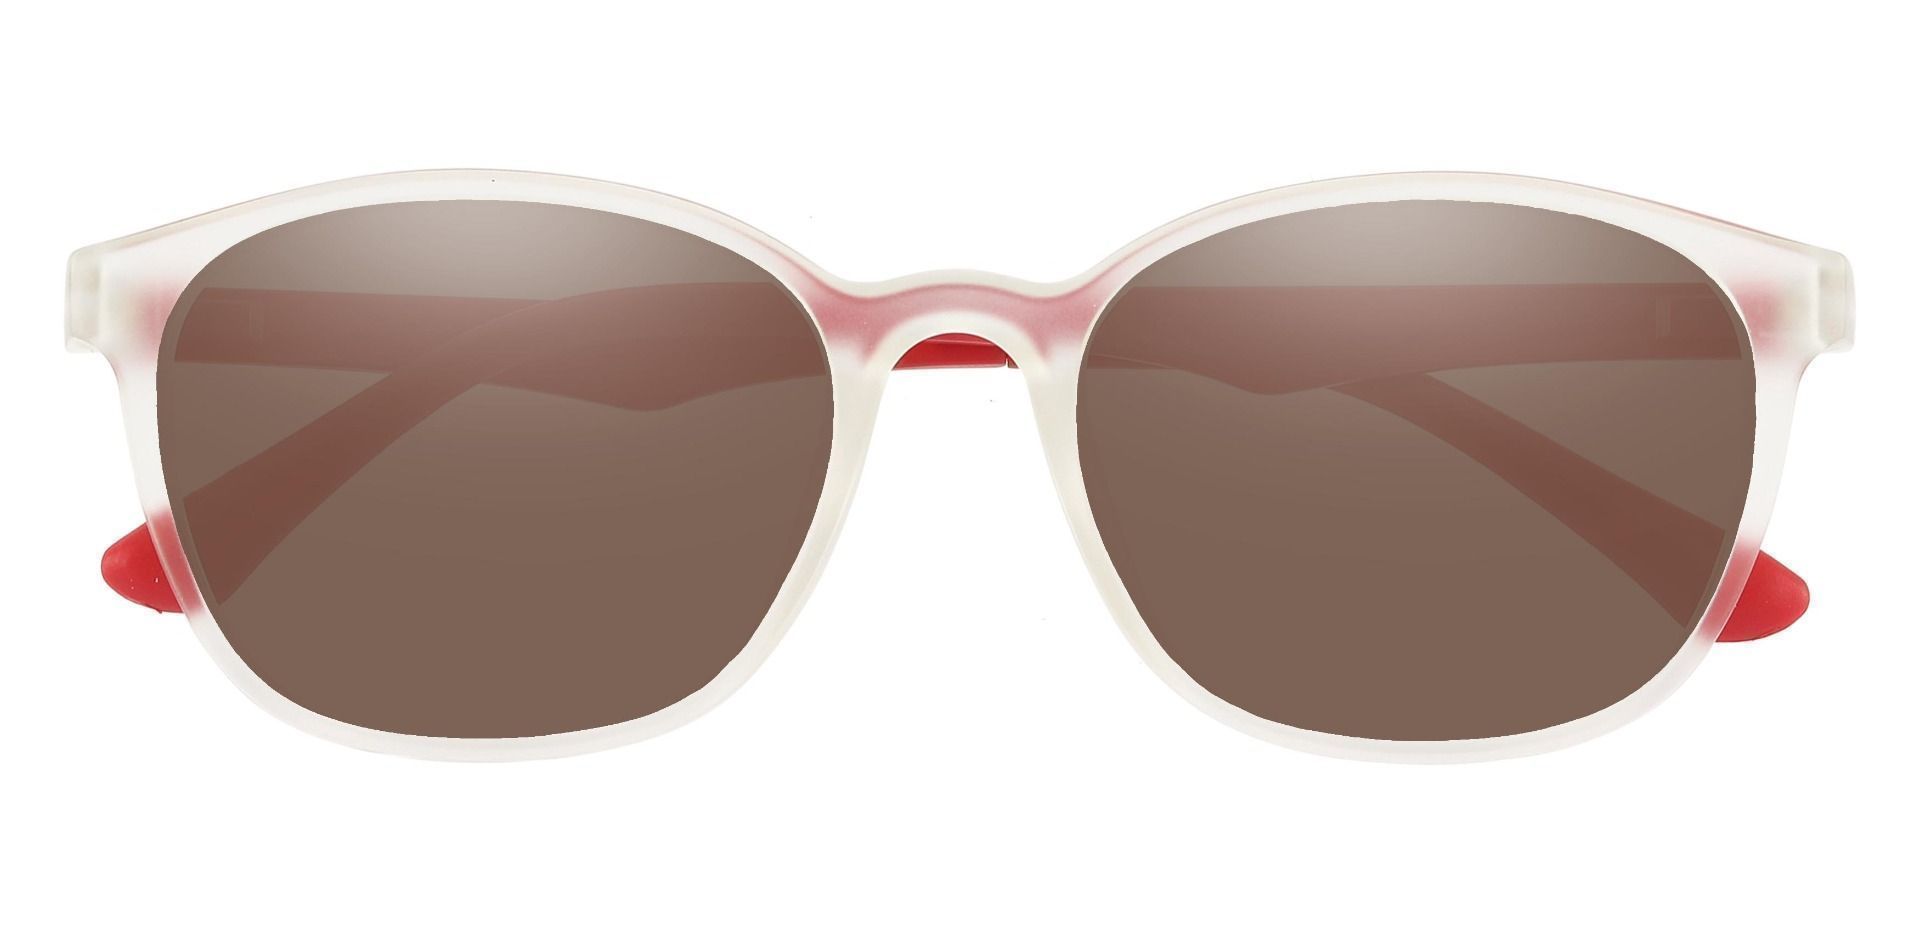 Ursula Oval Reading Sunglasses - Matte Clear Frame With Brown Lenses